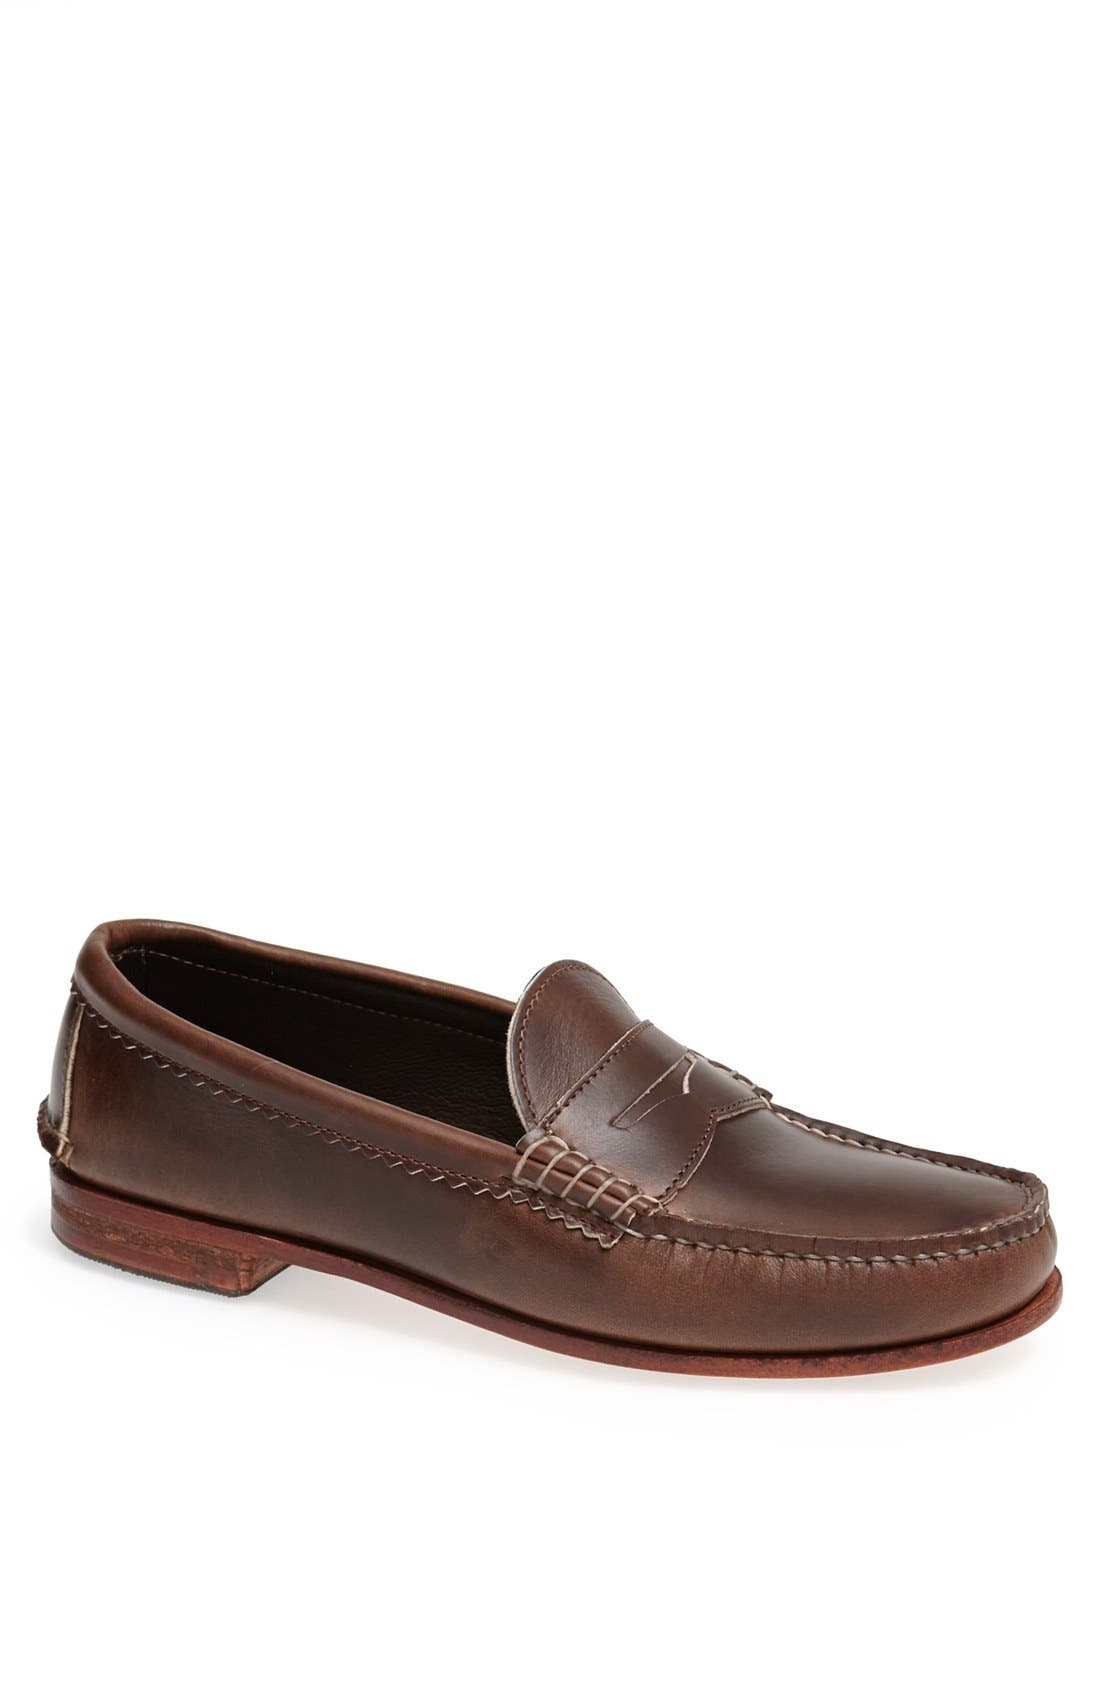 Quoddy 'True' Penny Loafer | Nordstrom